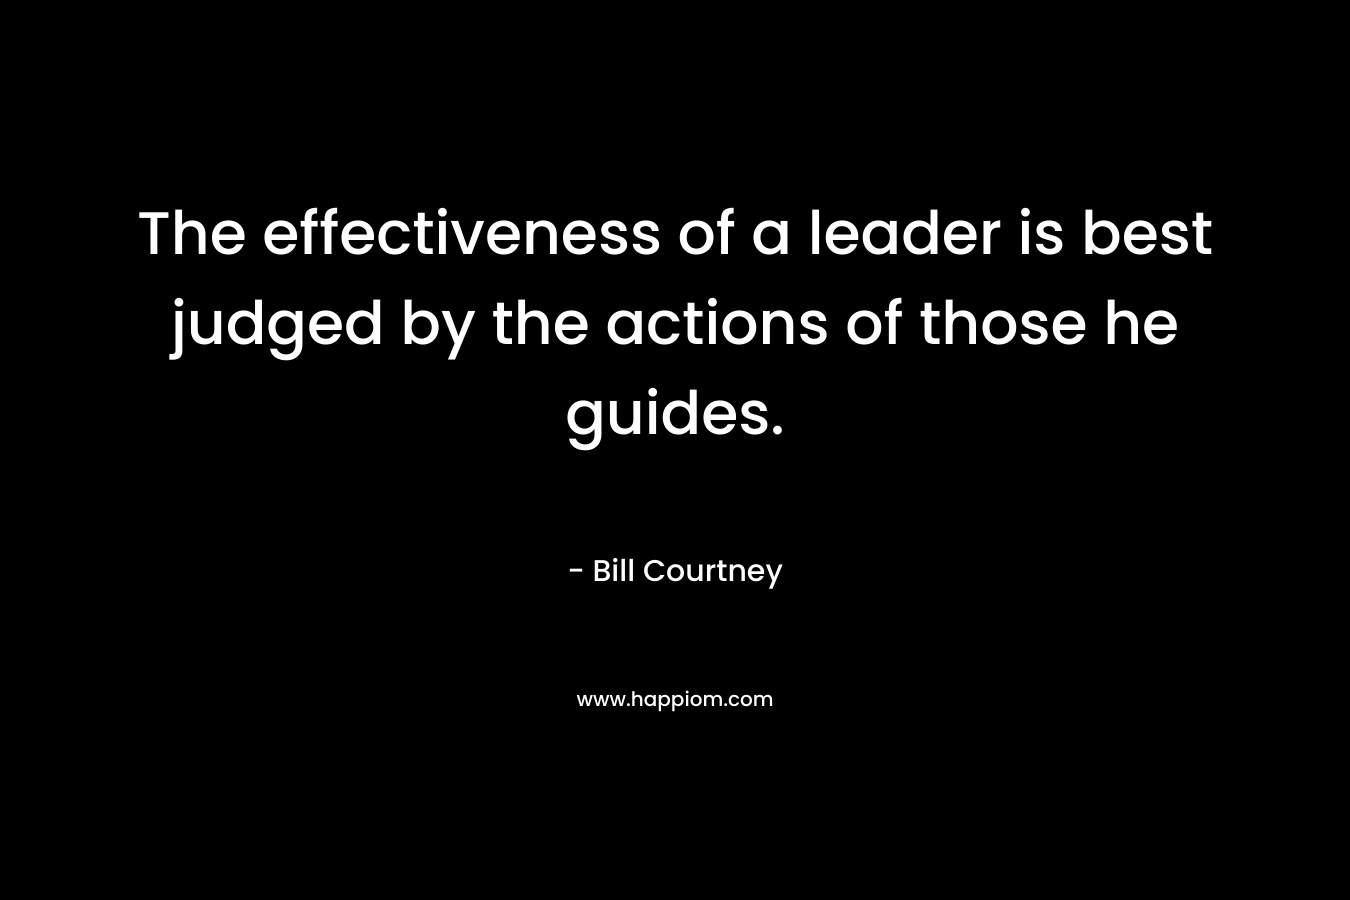 The effectiveness of a leader is best judged by the actions of those he guides. – Bill Courtney